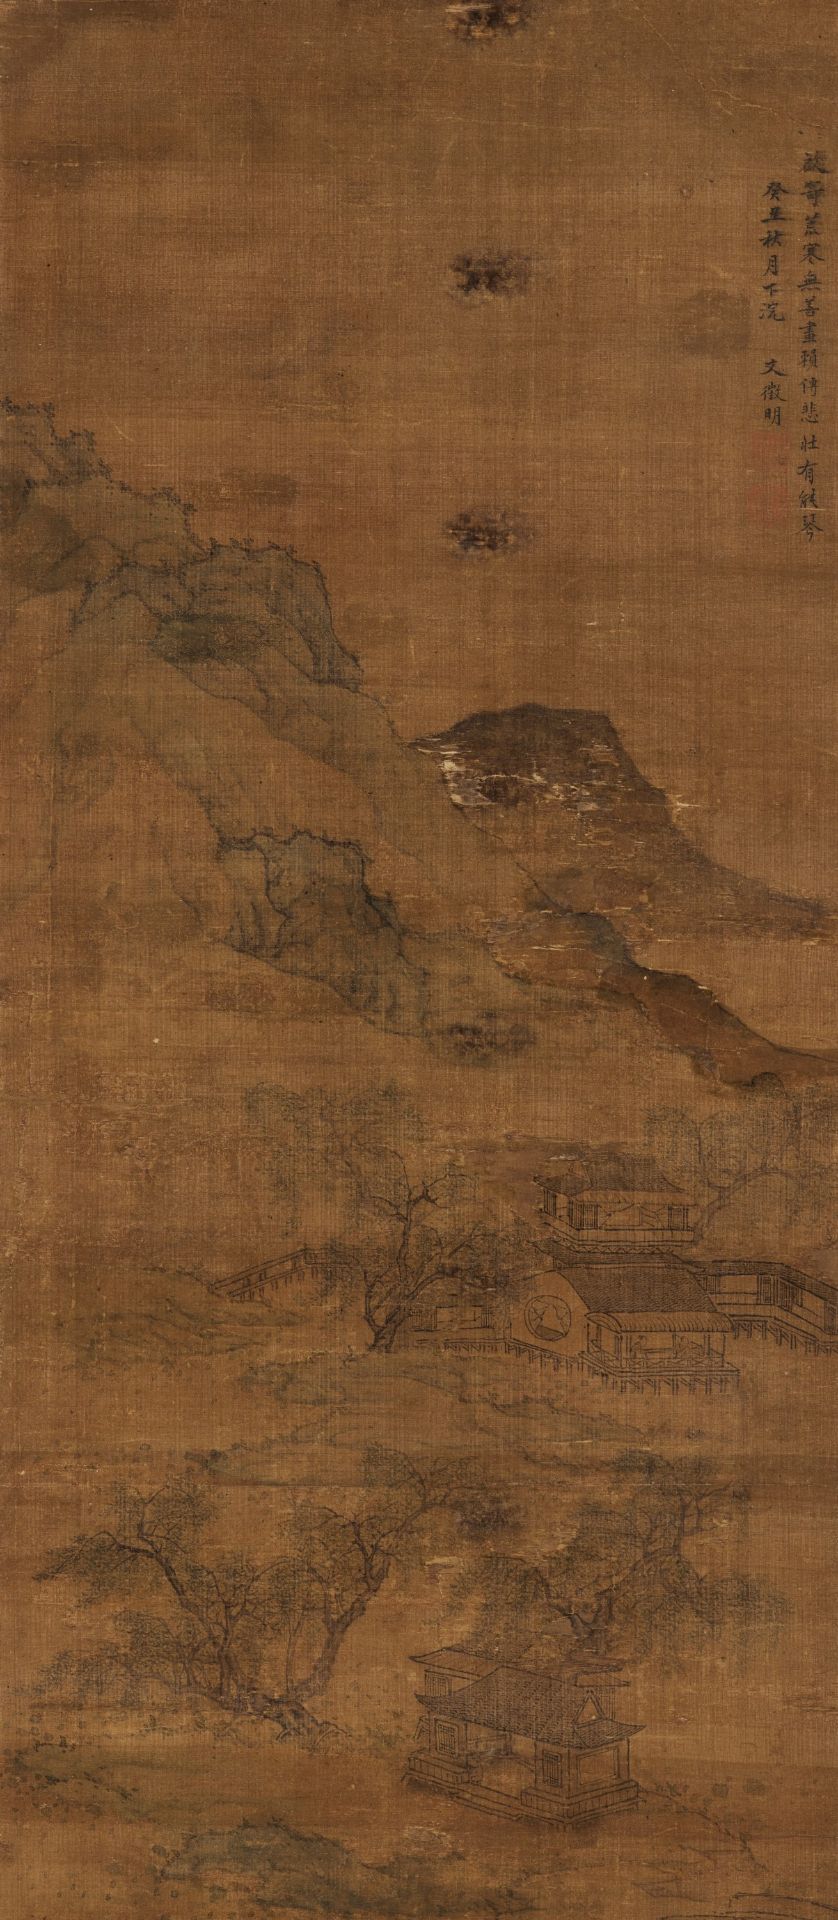 LANDSCAPE', WITH SIGNATURE OF WEN ZHENGMING (1470-1559)